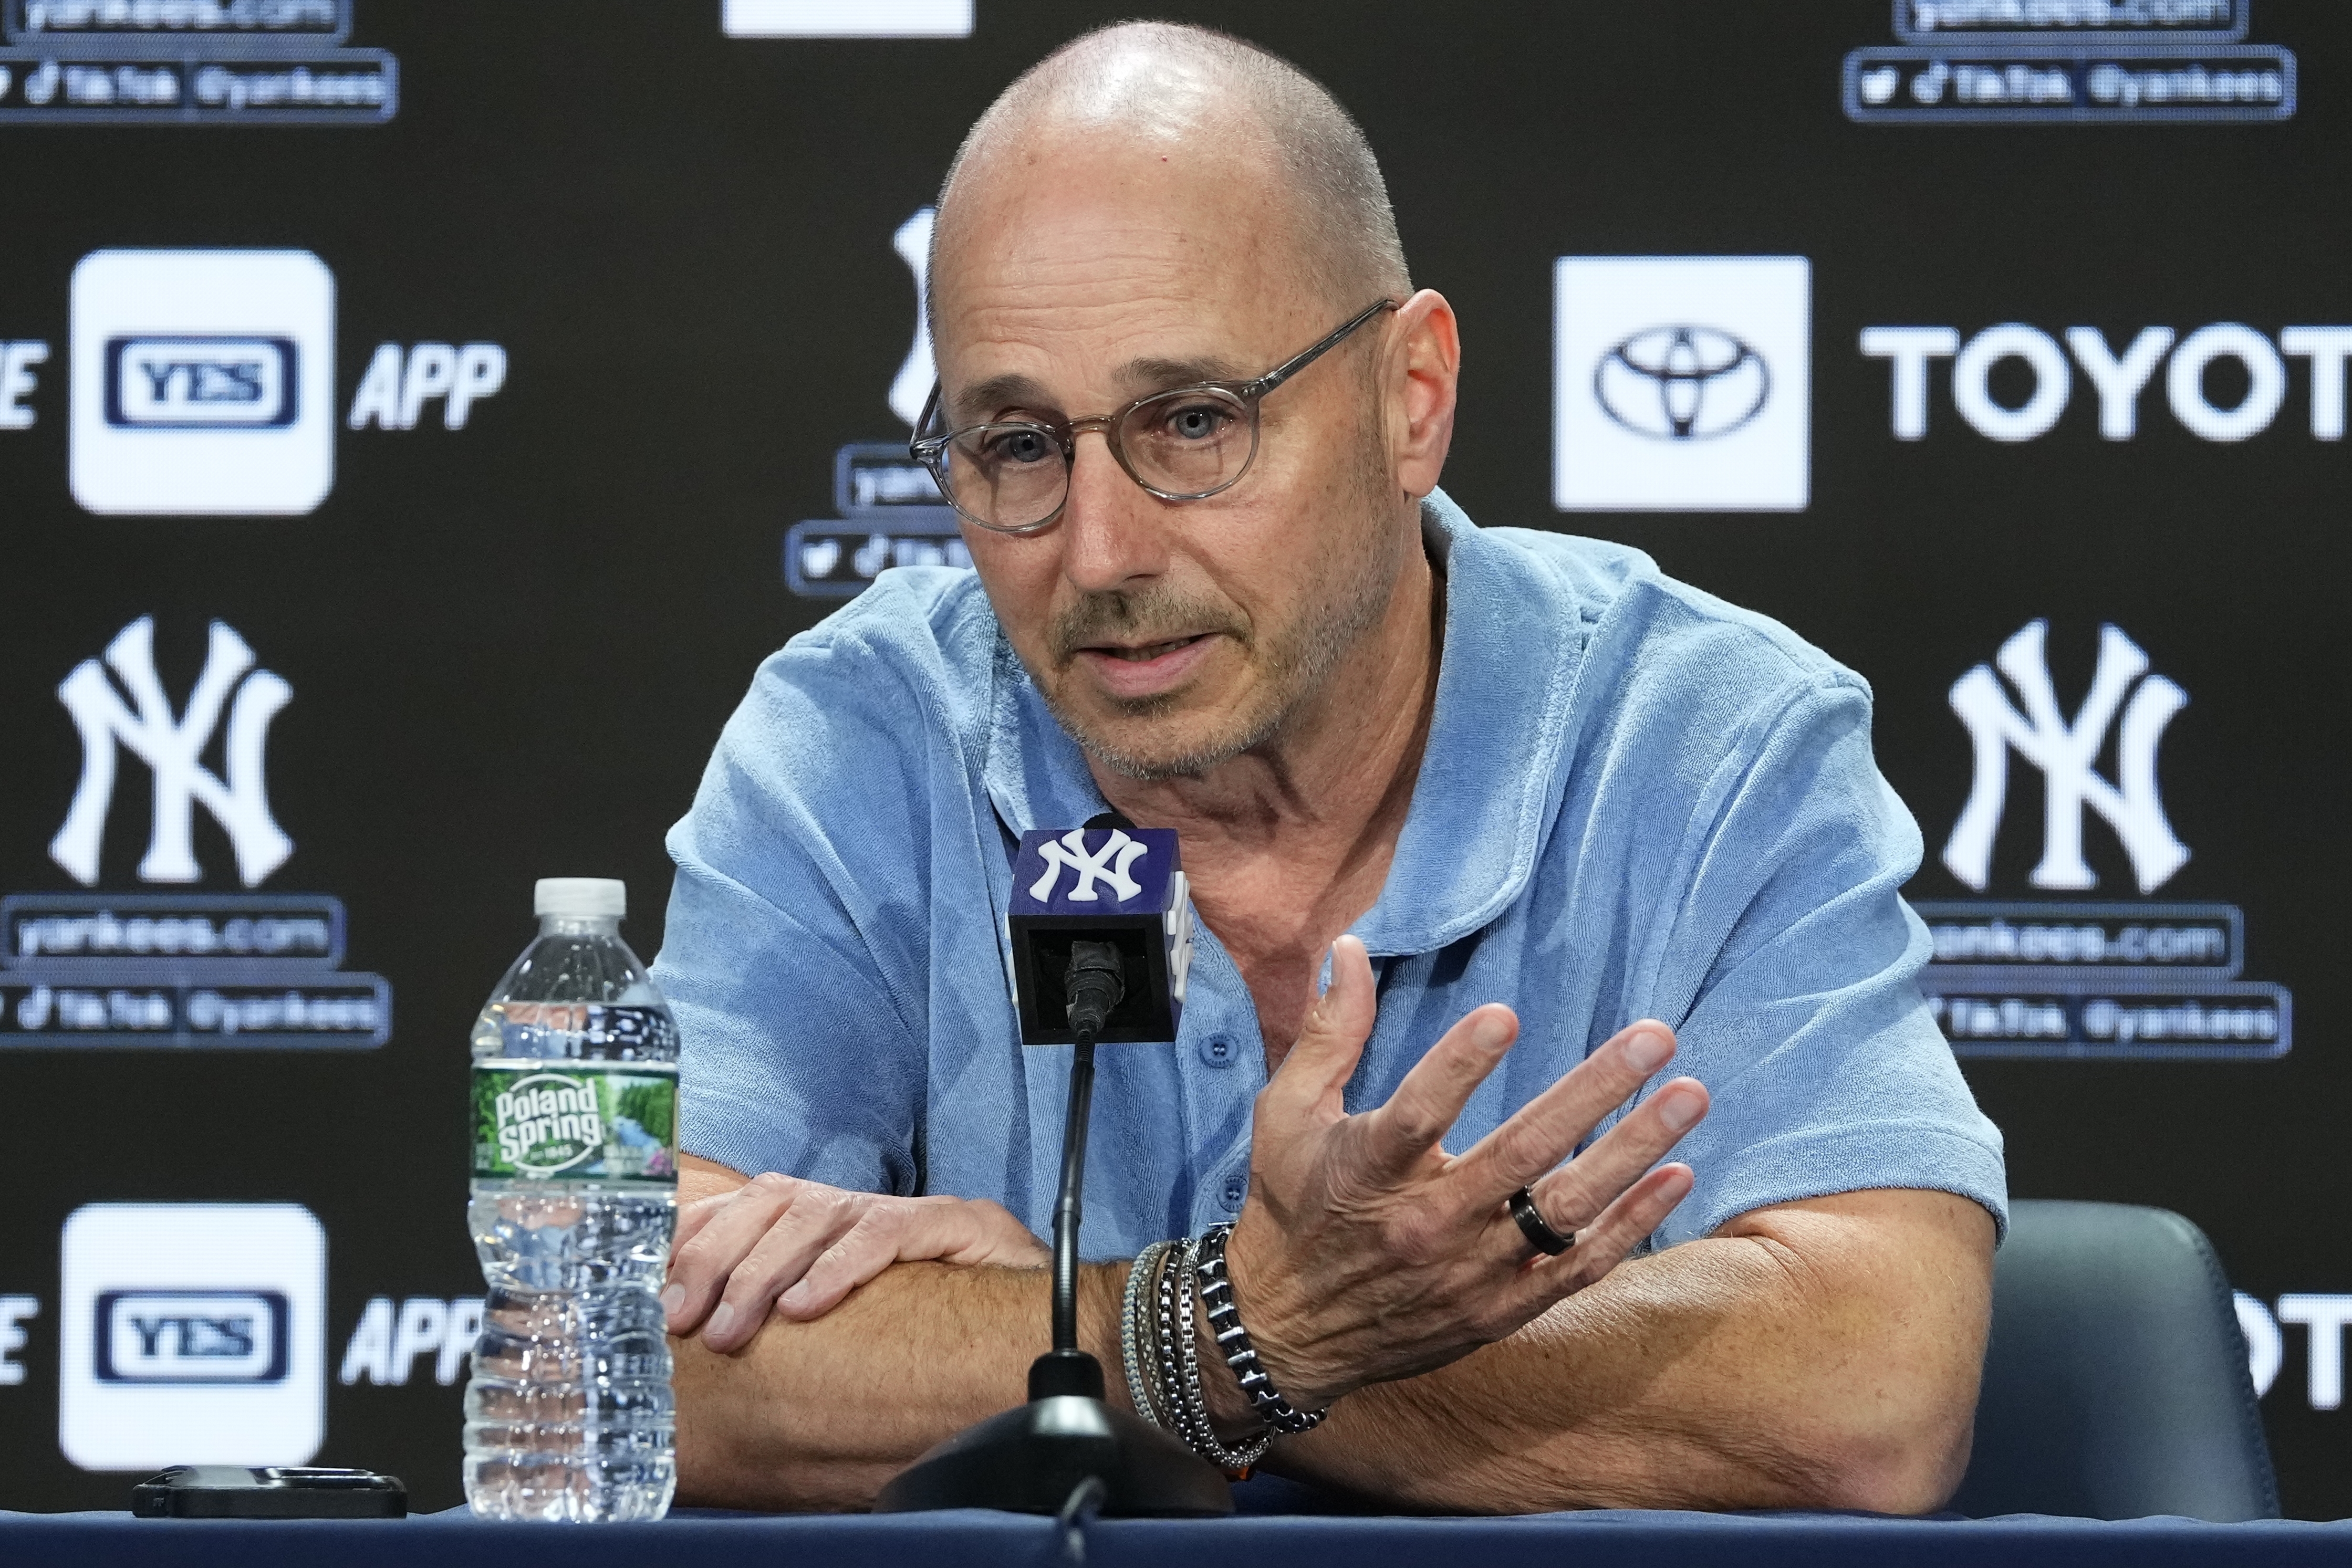 Yankees' Brian Cashman voices support for manager Aaron Boone as